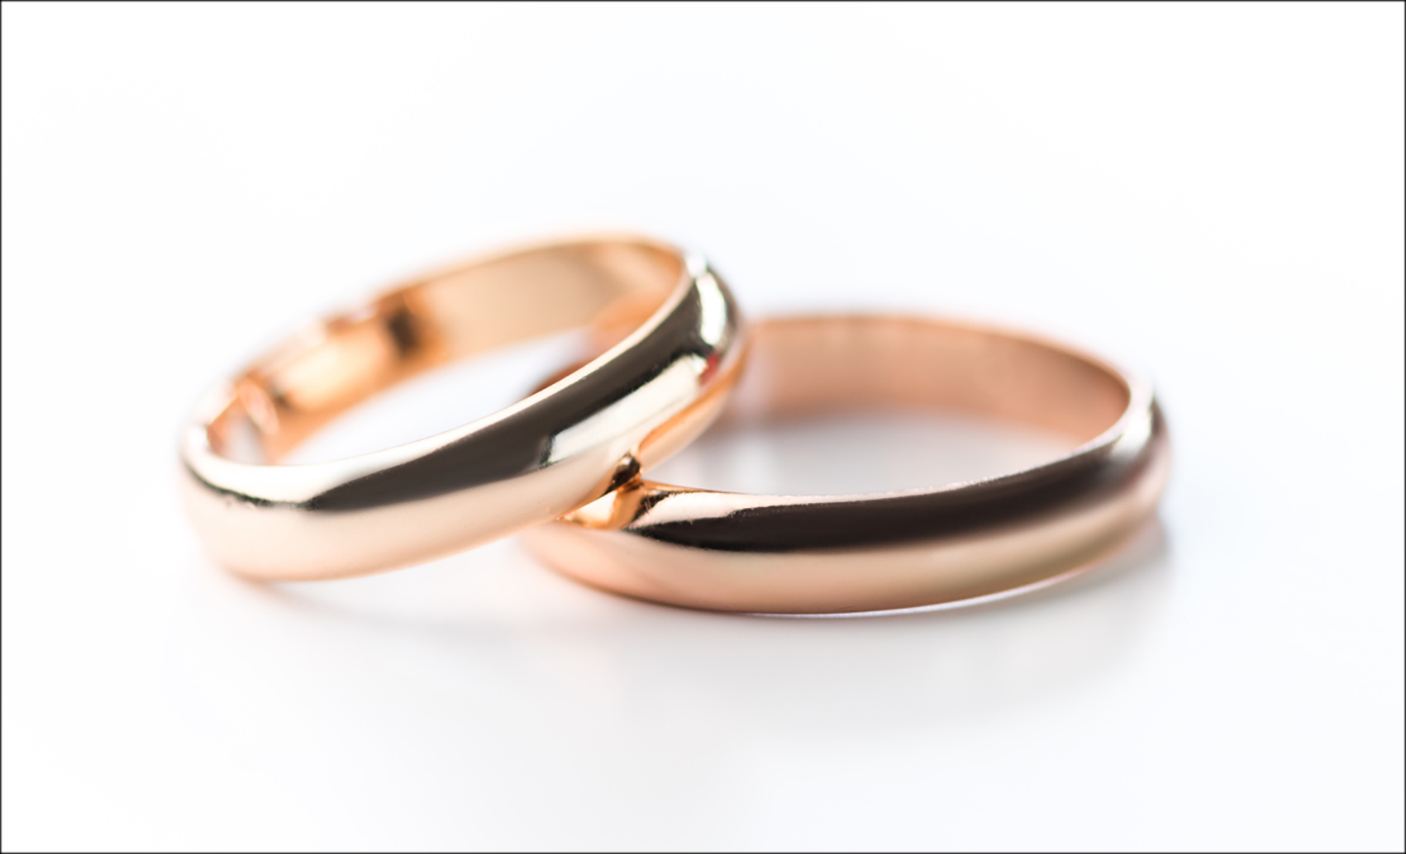 two wedding rings stacked on one another